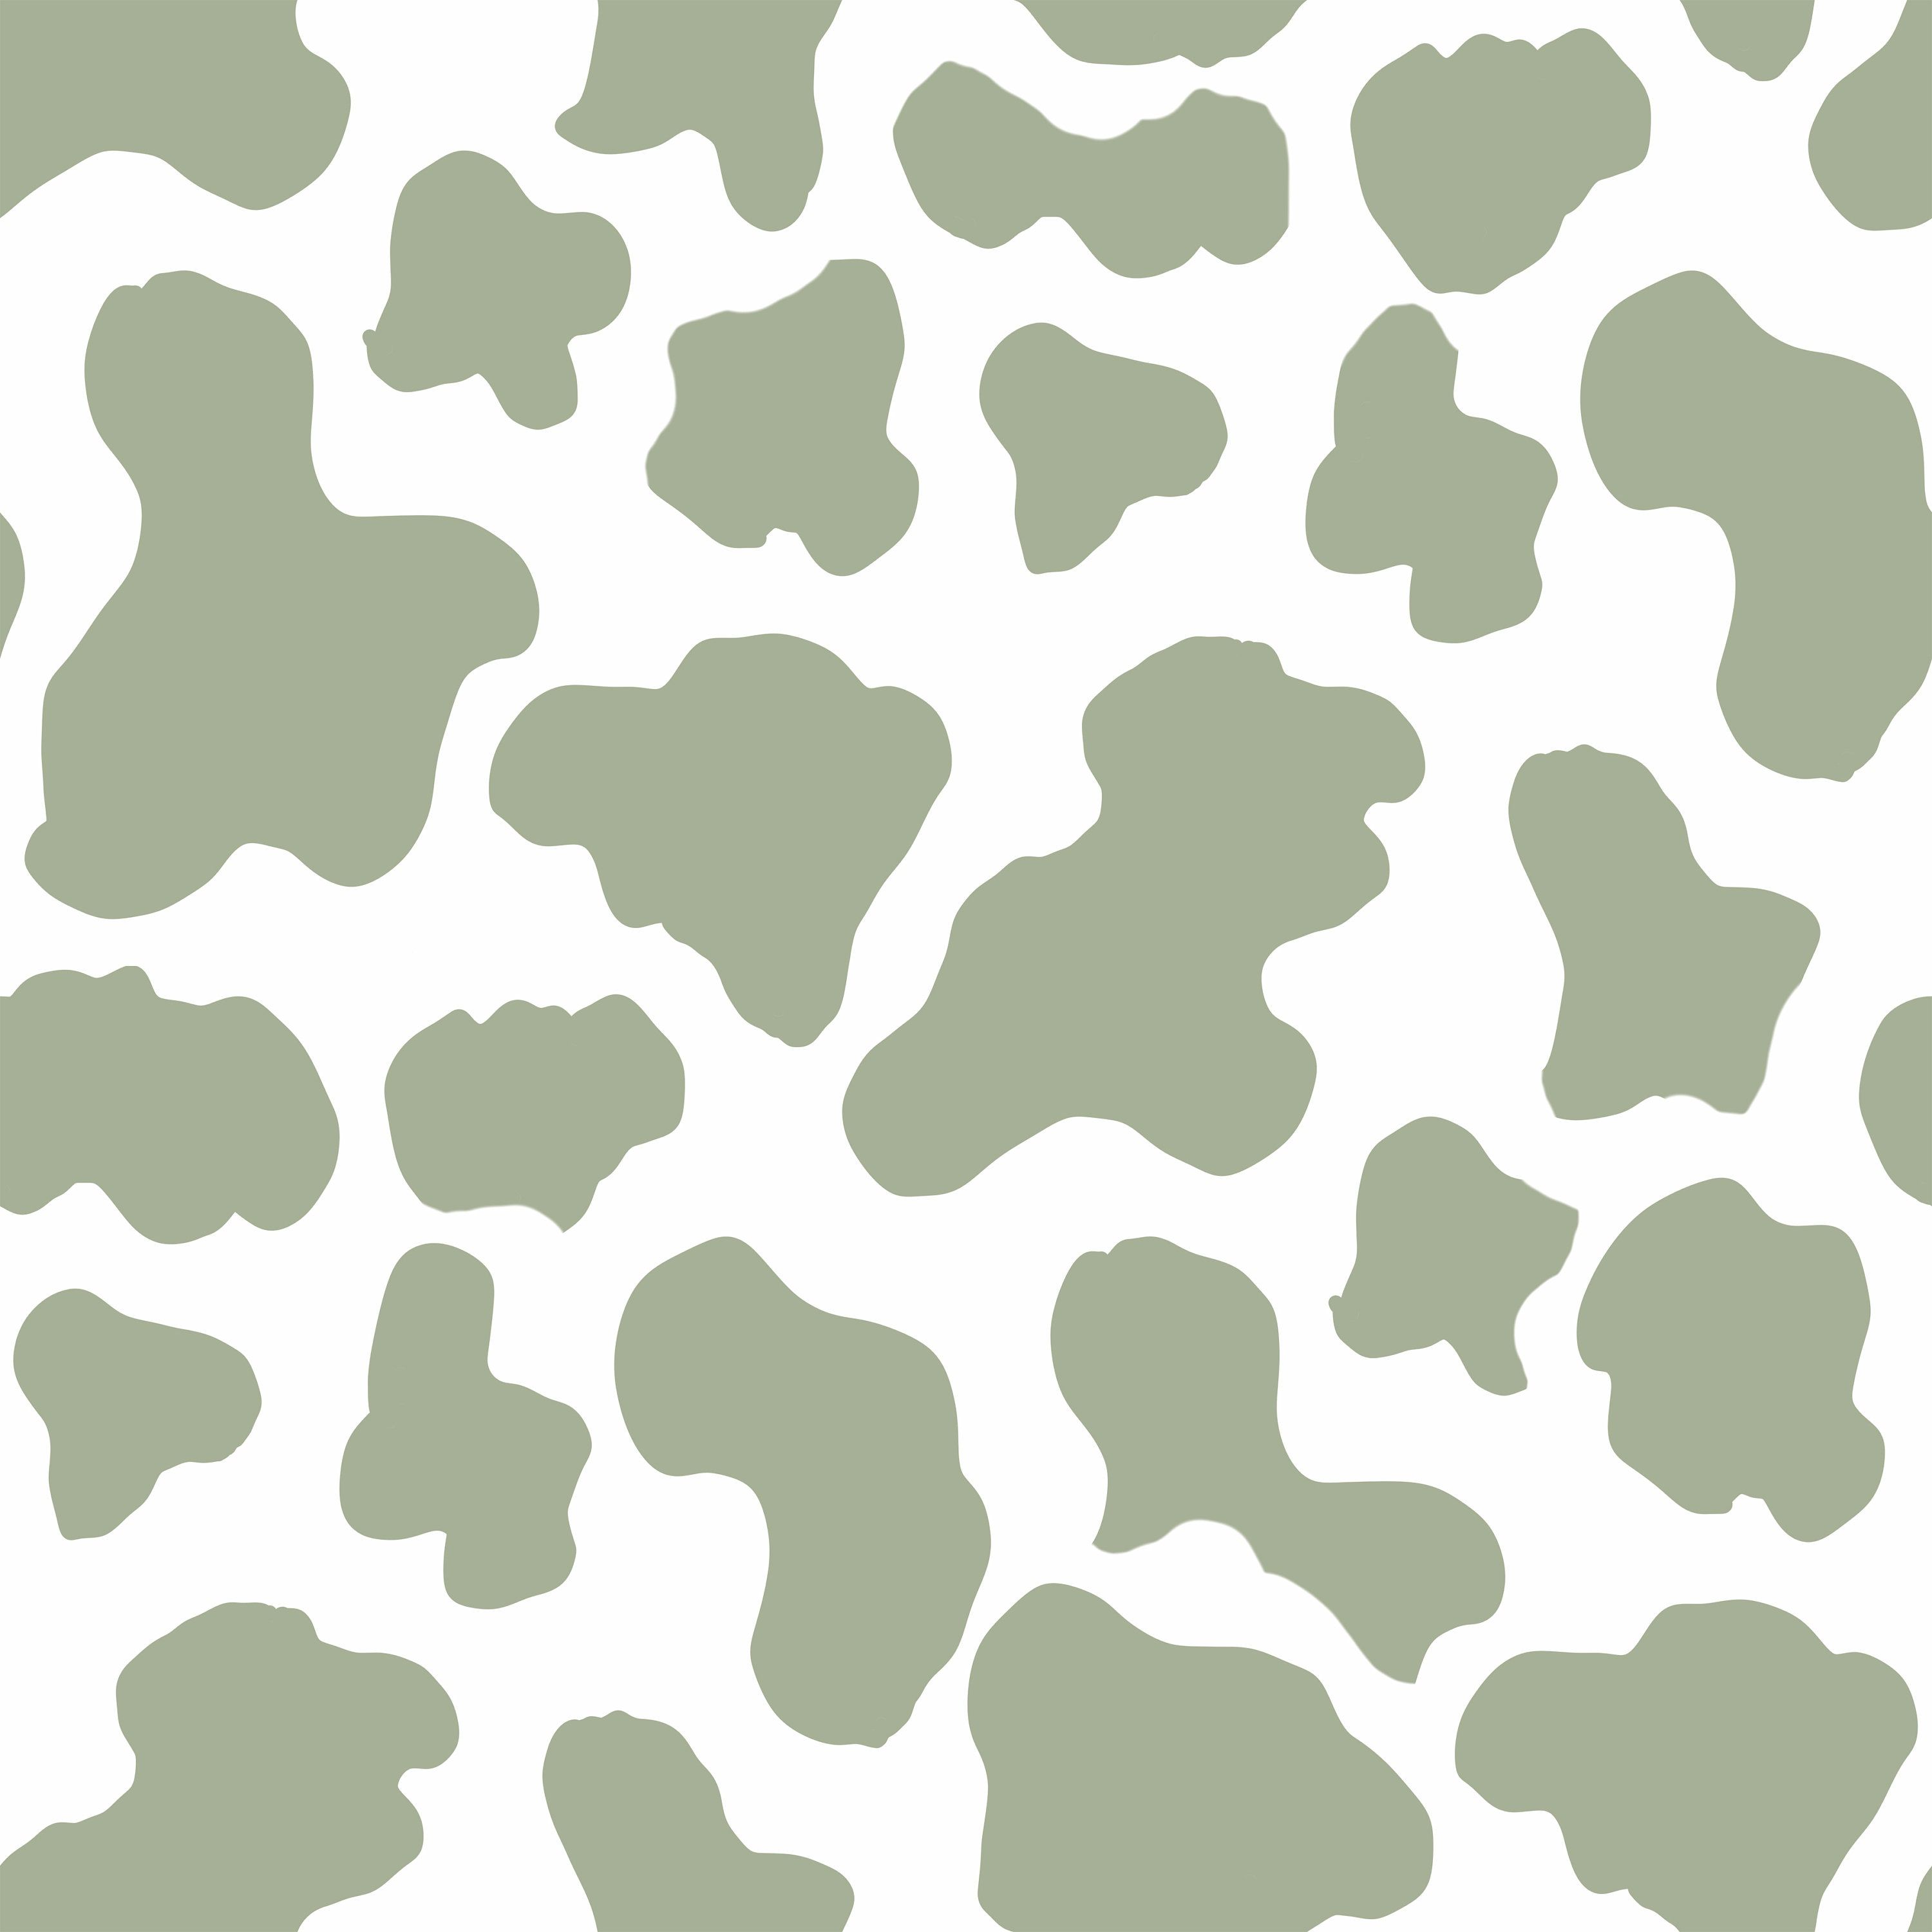 A pattern of green and white spots - Green